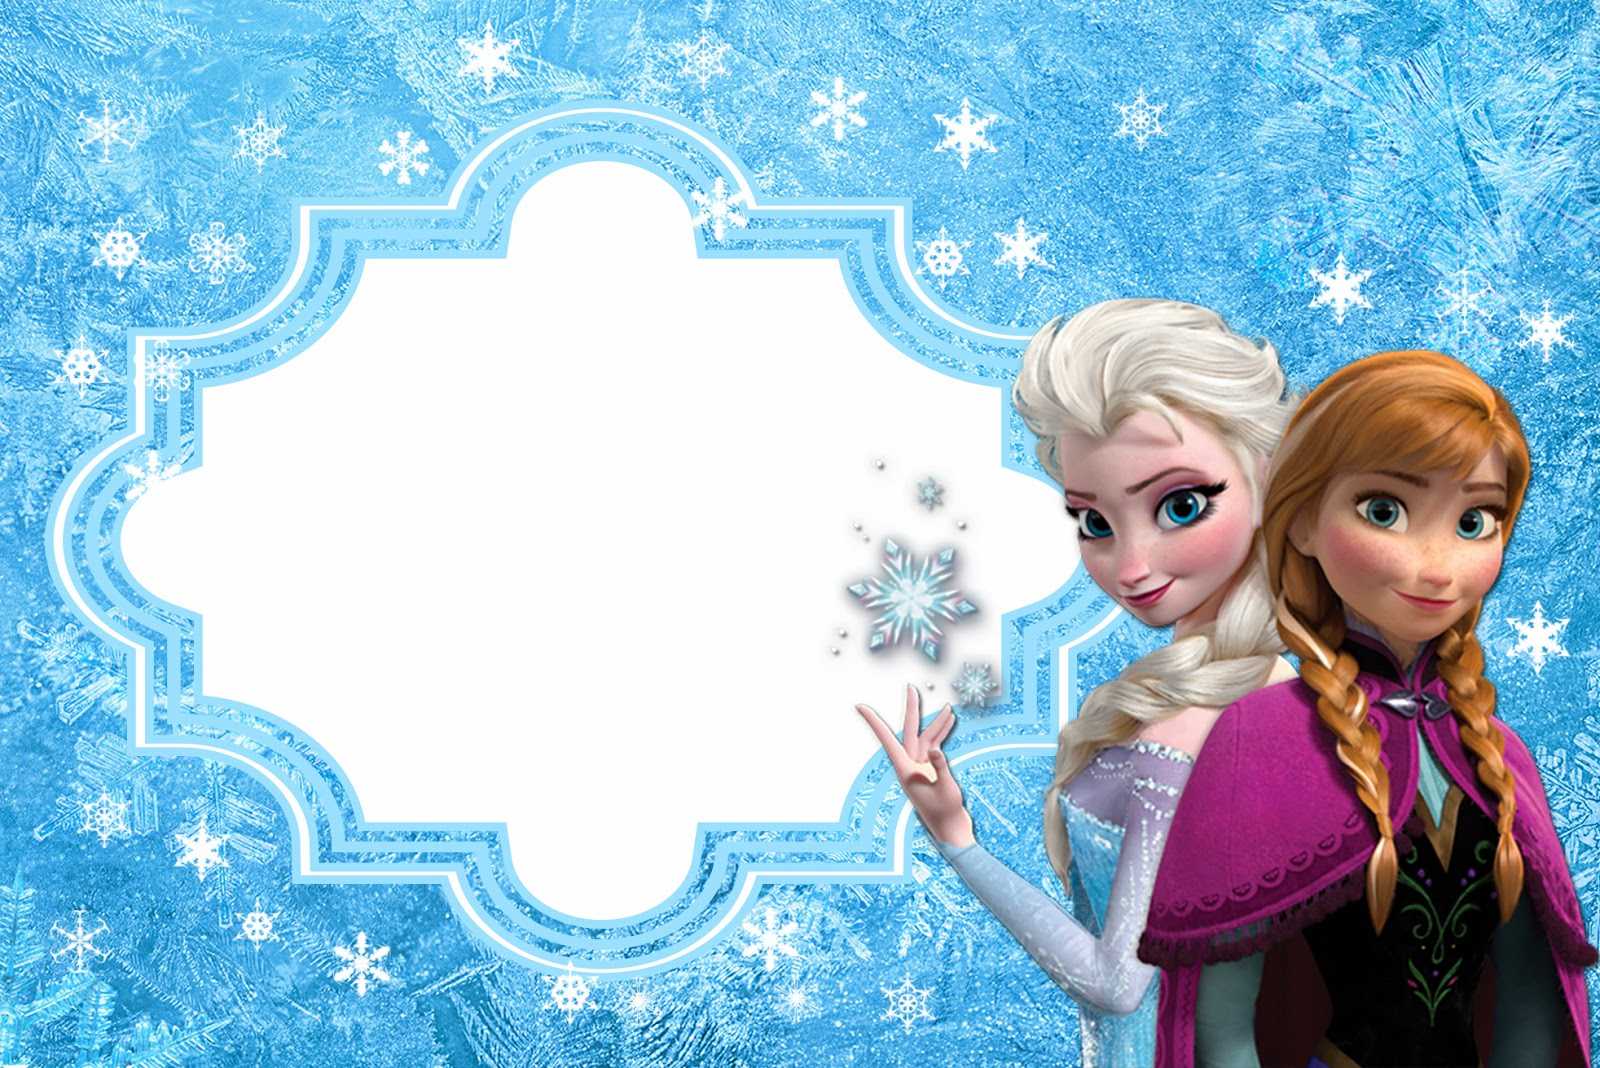 Frozen: Free Printable Cards Or Party Invitations. - Oh My Inside Frozen Birthday Card Template